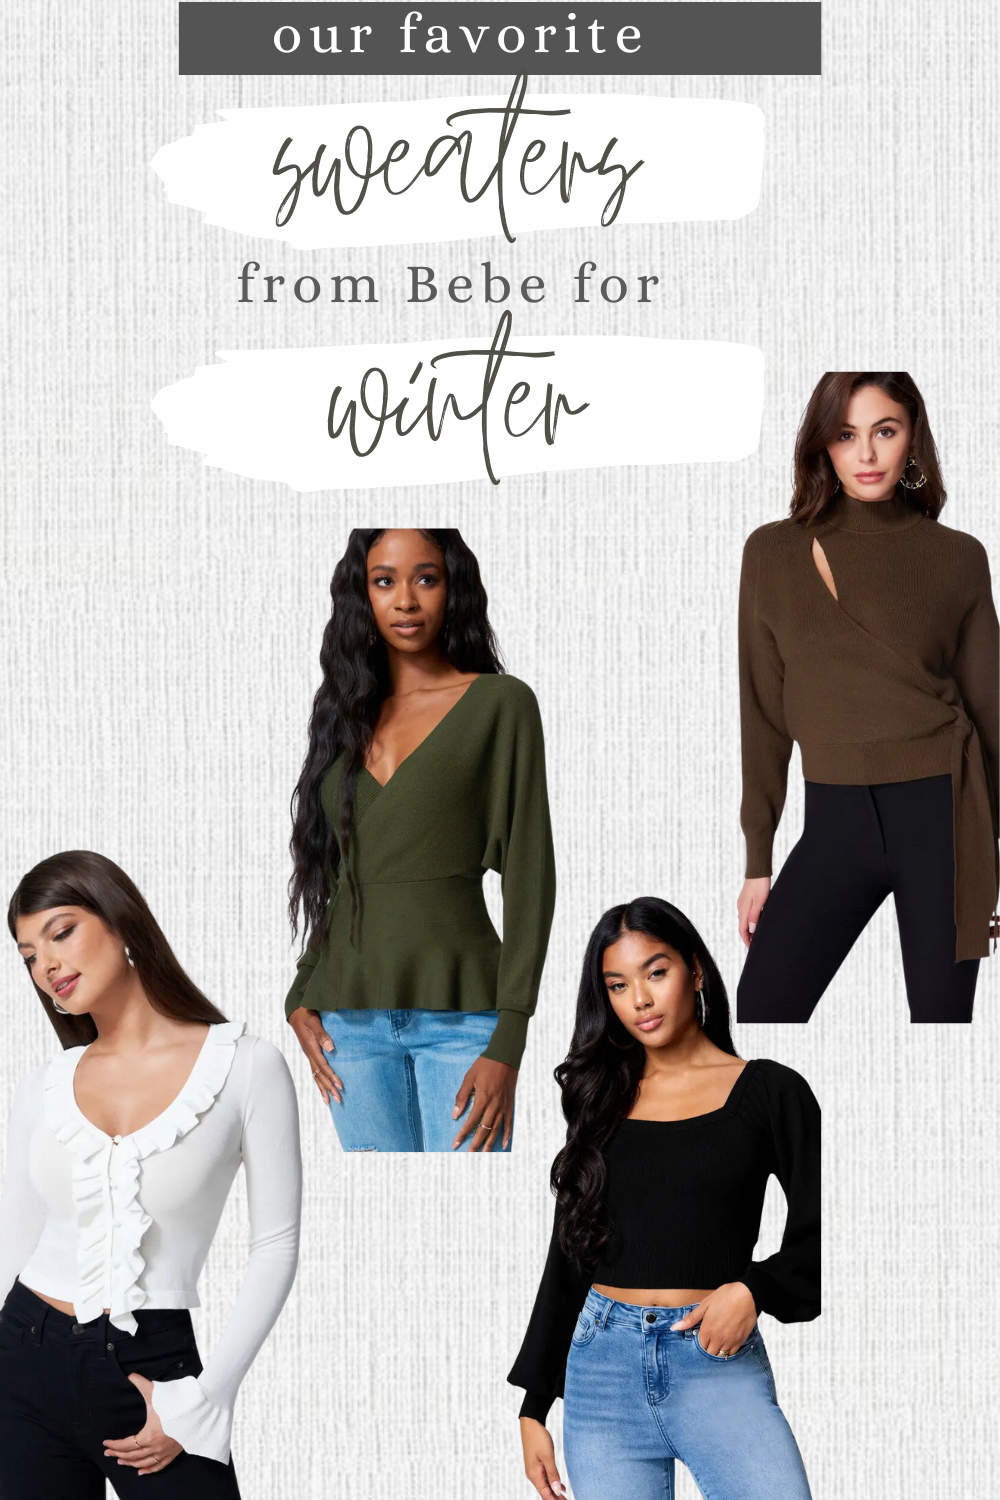 Sweaters from Bebe